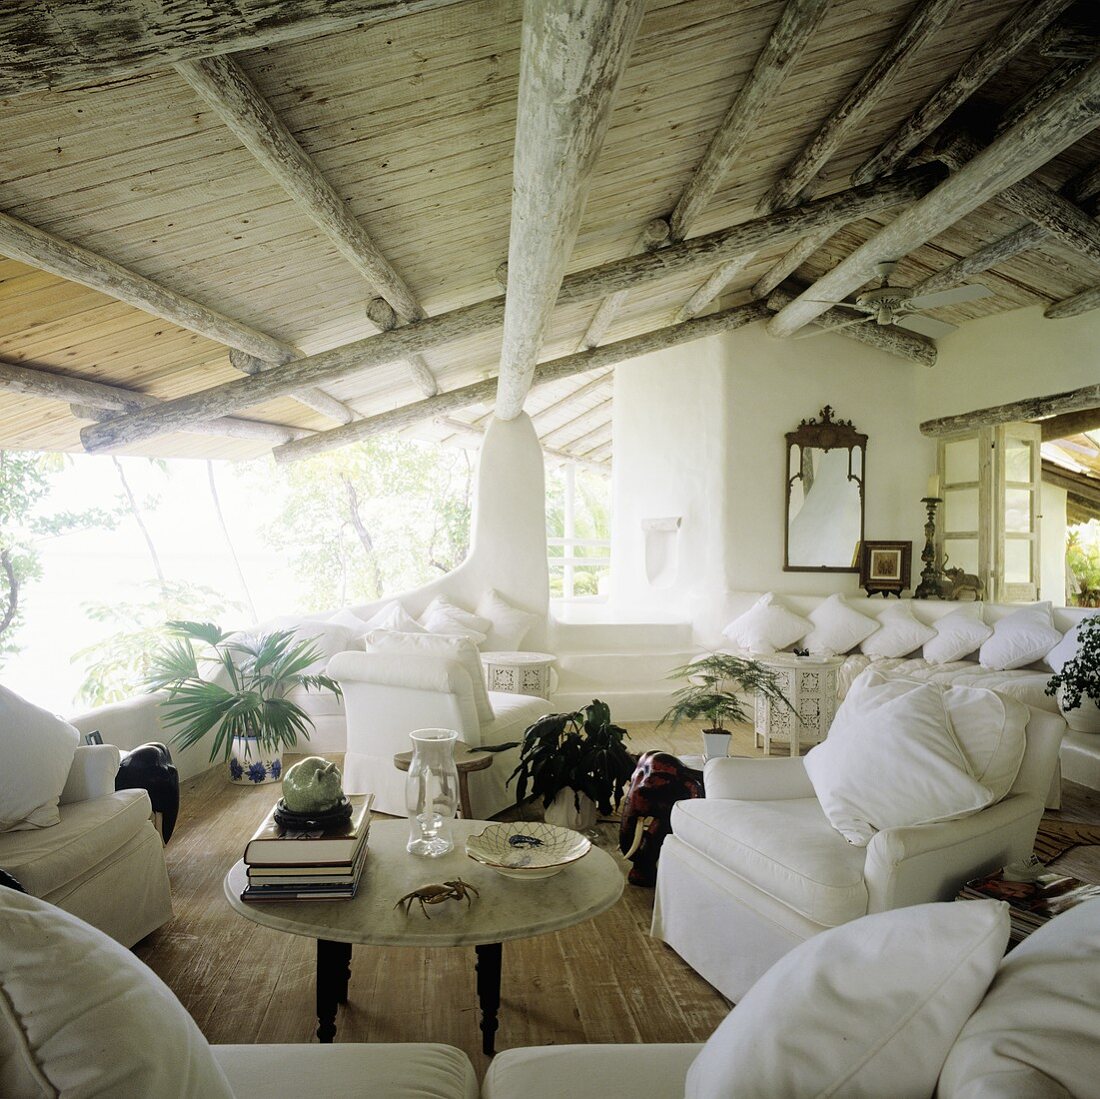 Vacation home in the tropic with rustic wooden roof and view with white sectional sofa